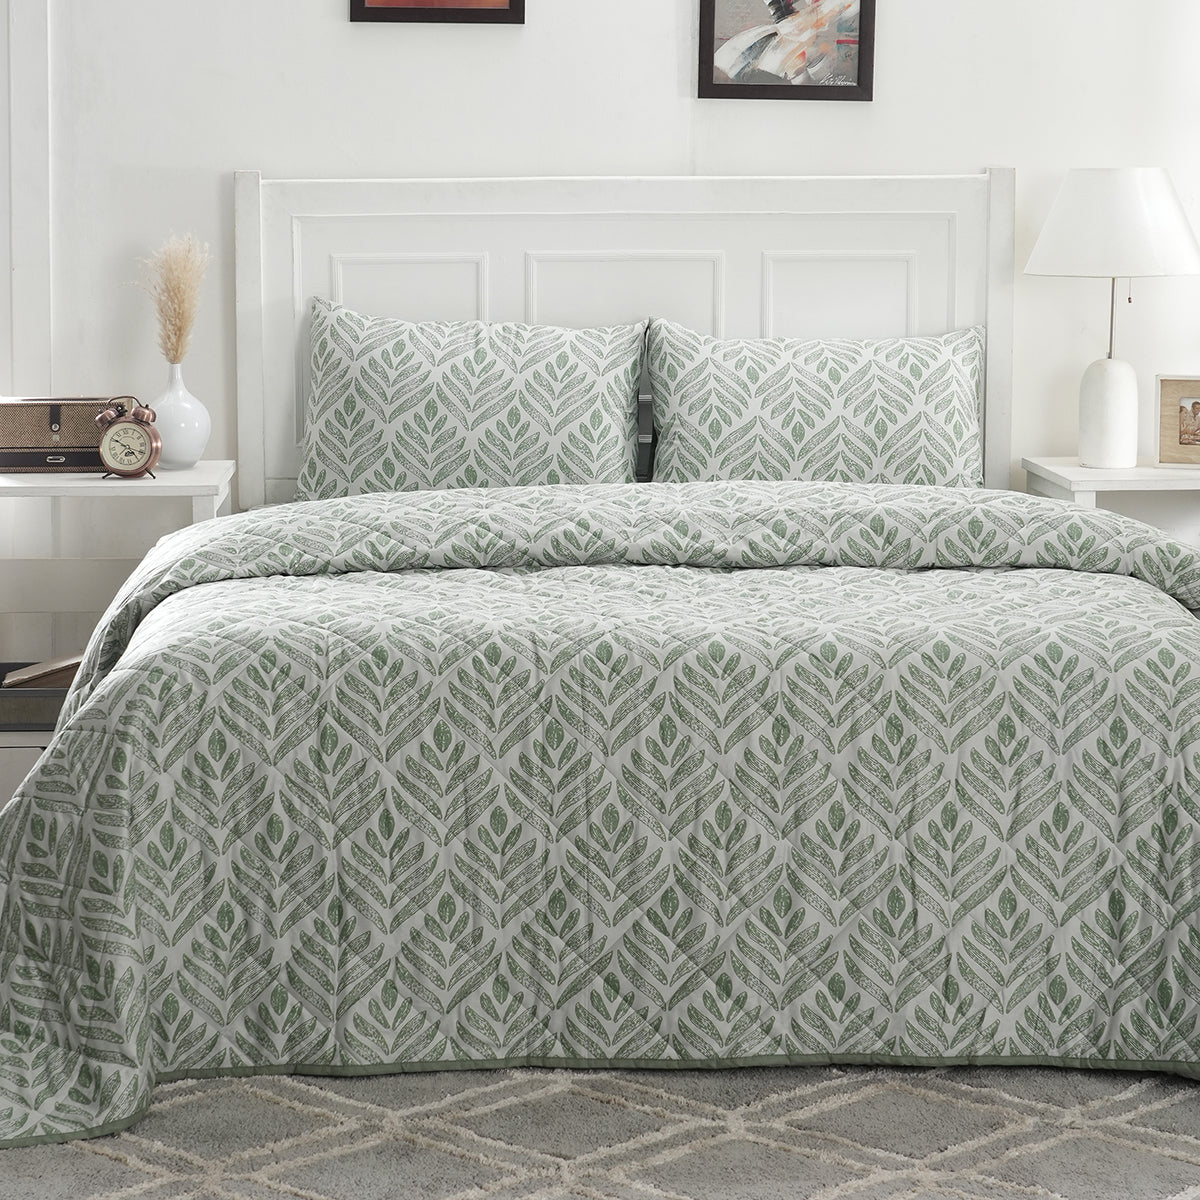 Royal Botanic Petal Touch Green 4PC Quilt/Quilted Bed Cover Set